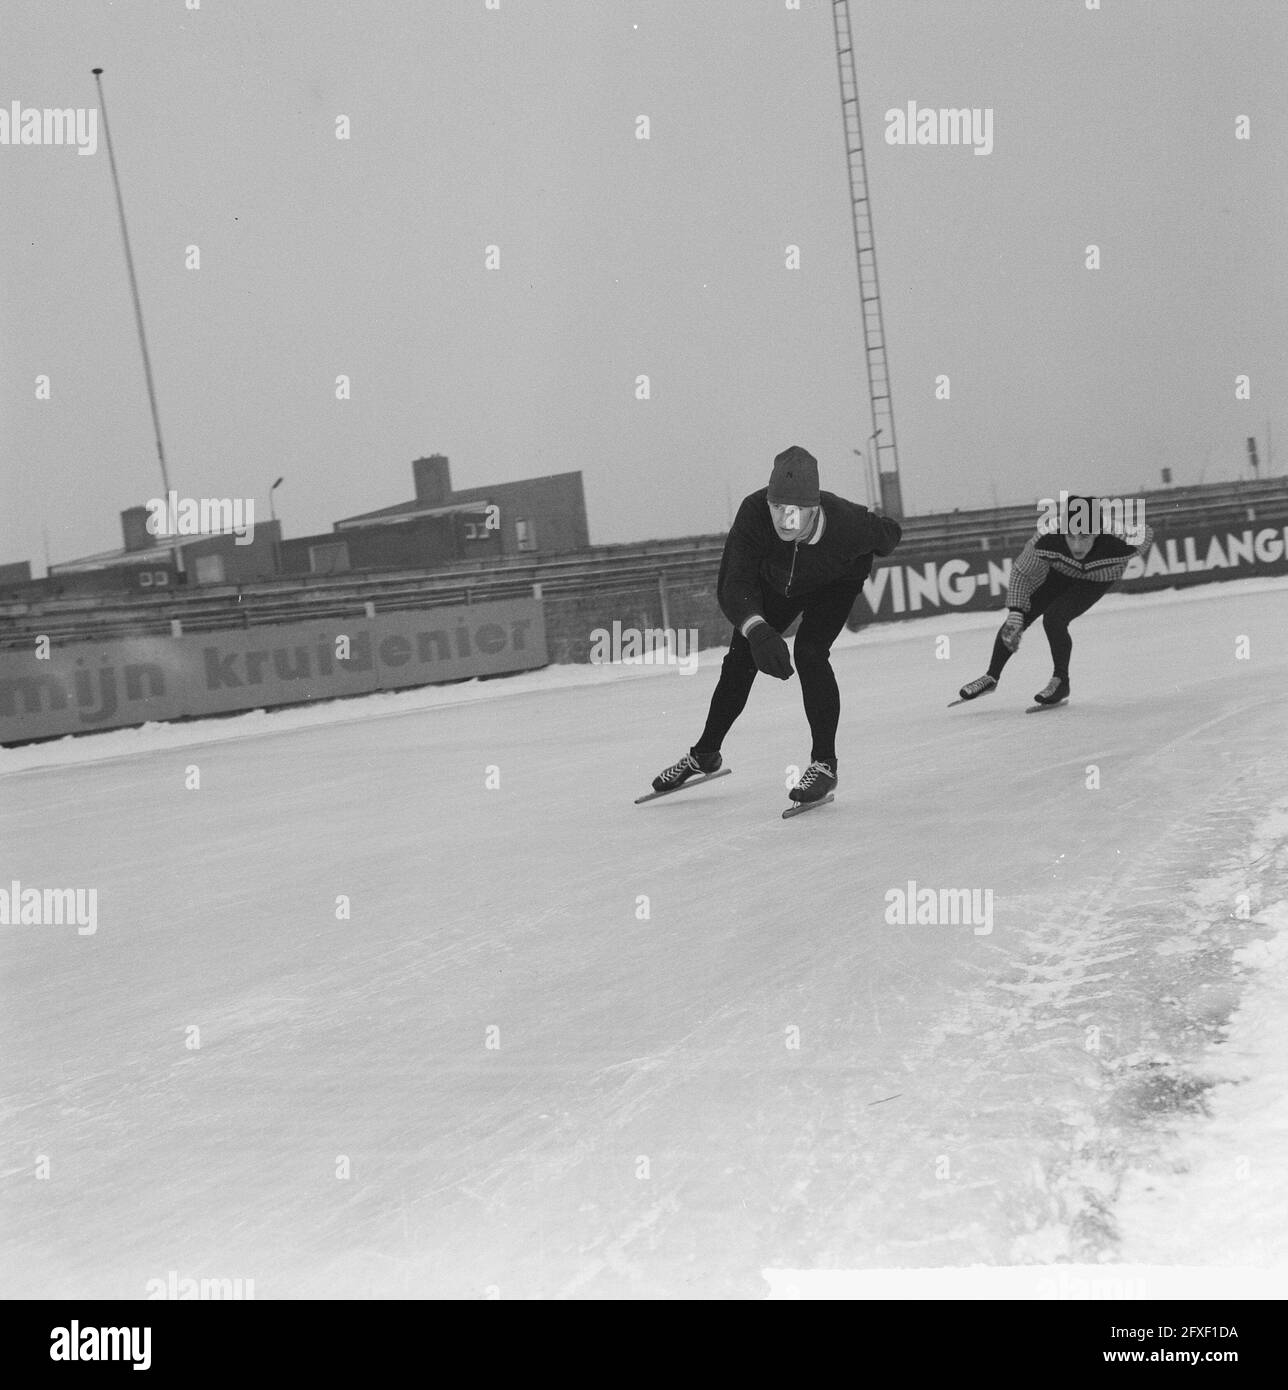 Training Dutch core team on Deventer artificial ice rink. Arie Zee, December 12, 1963, skating, sports, The Netherlands, 20th century press agency photo, news to remember, documentary, historic photography 1945-1990, visual stories, human history of the Twentieth Century, capturing moments in time Stock Photo